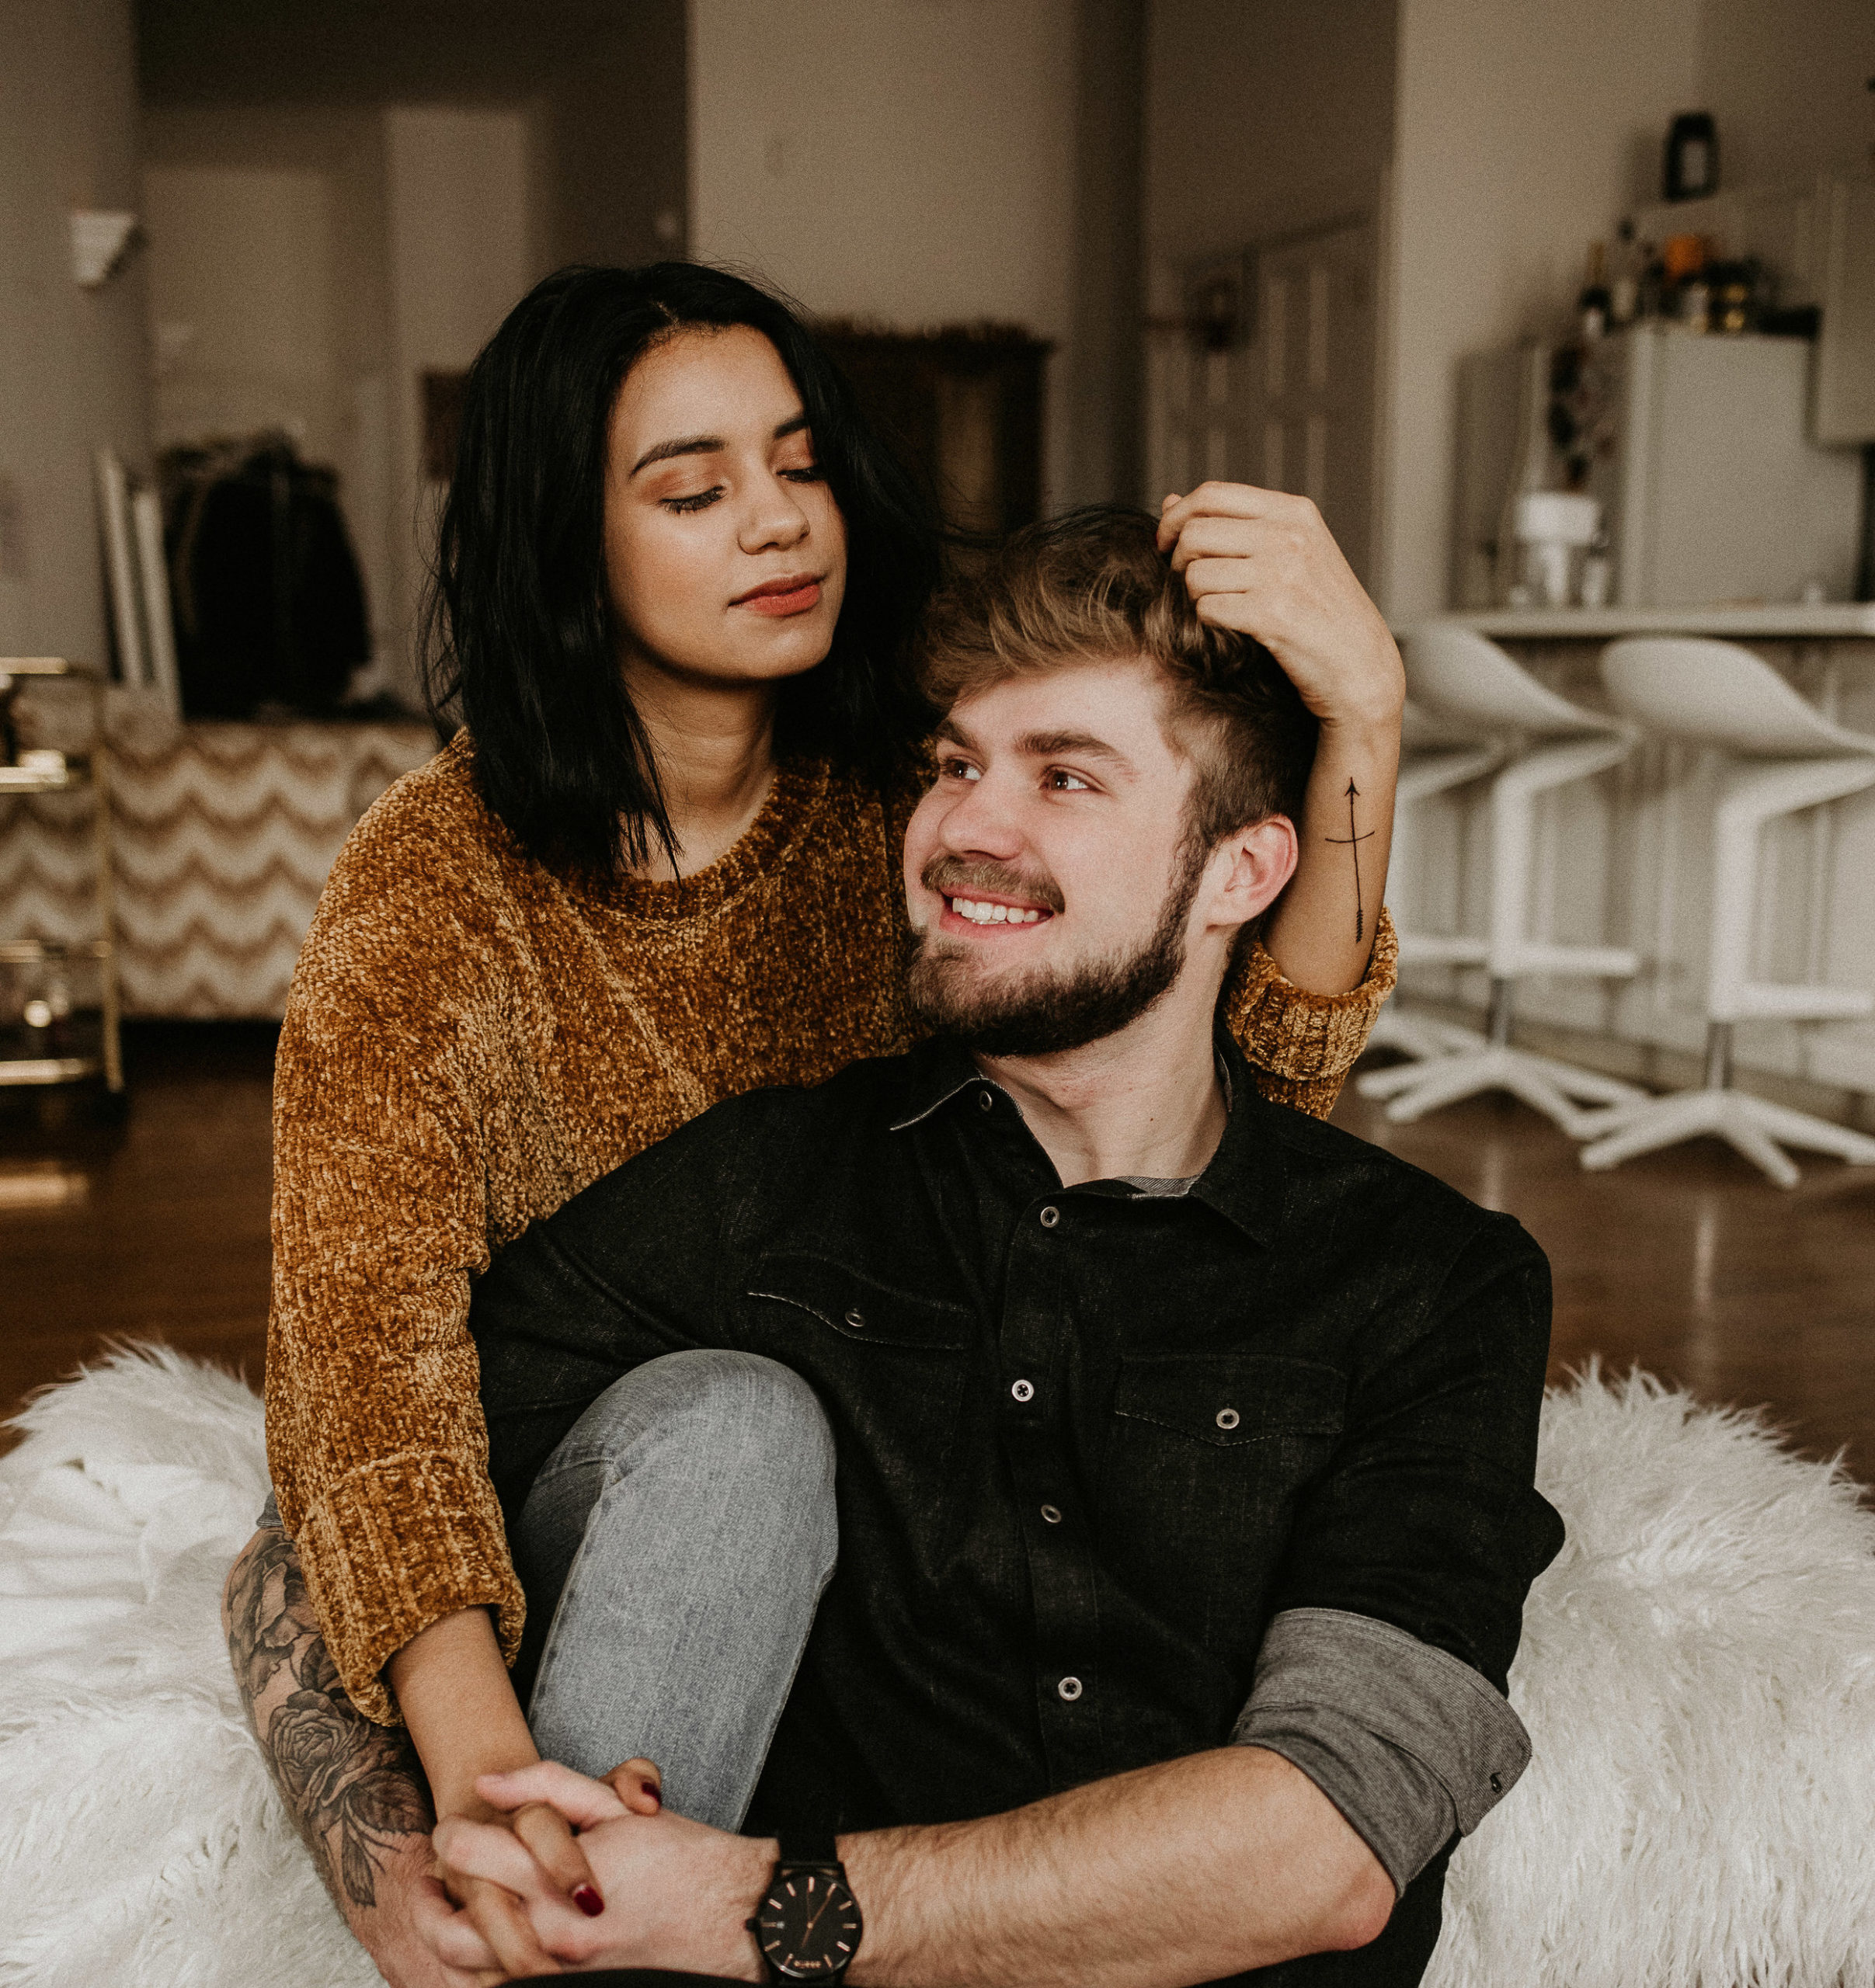 Couple In-Home Session 3.jpg